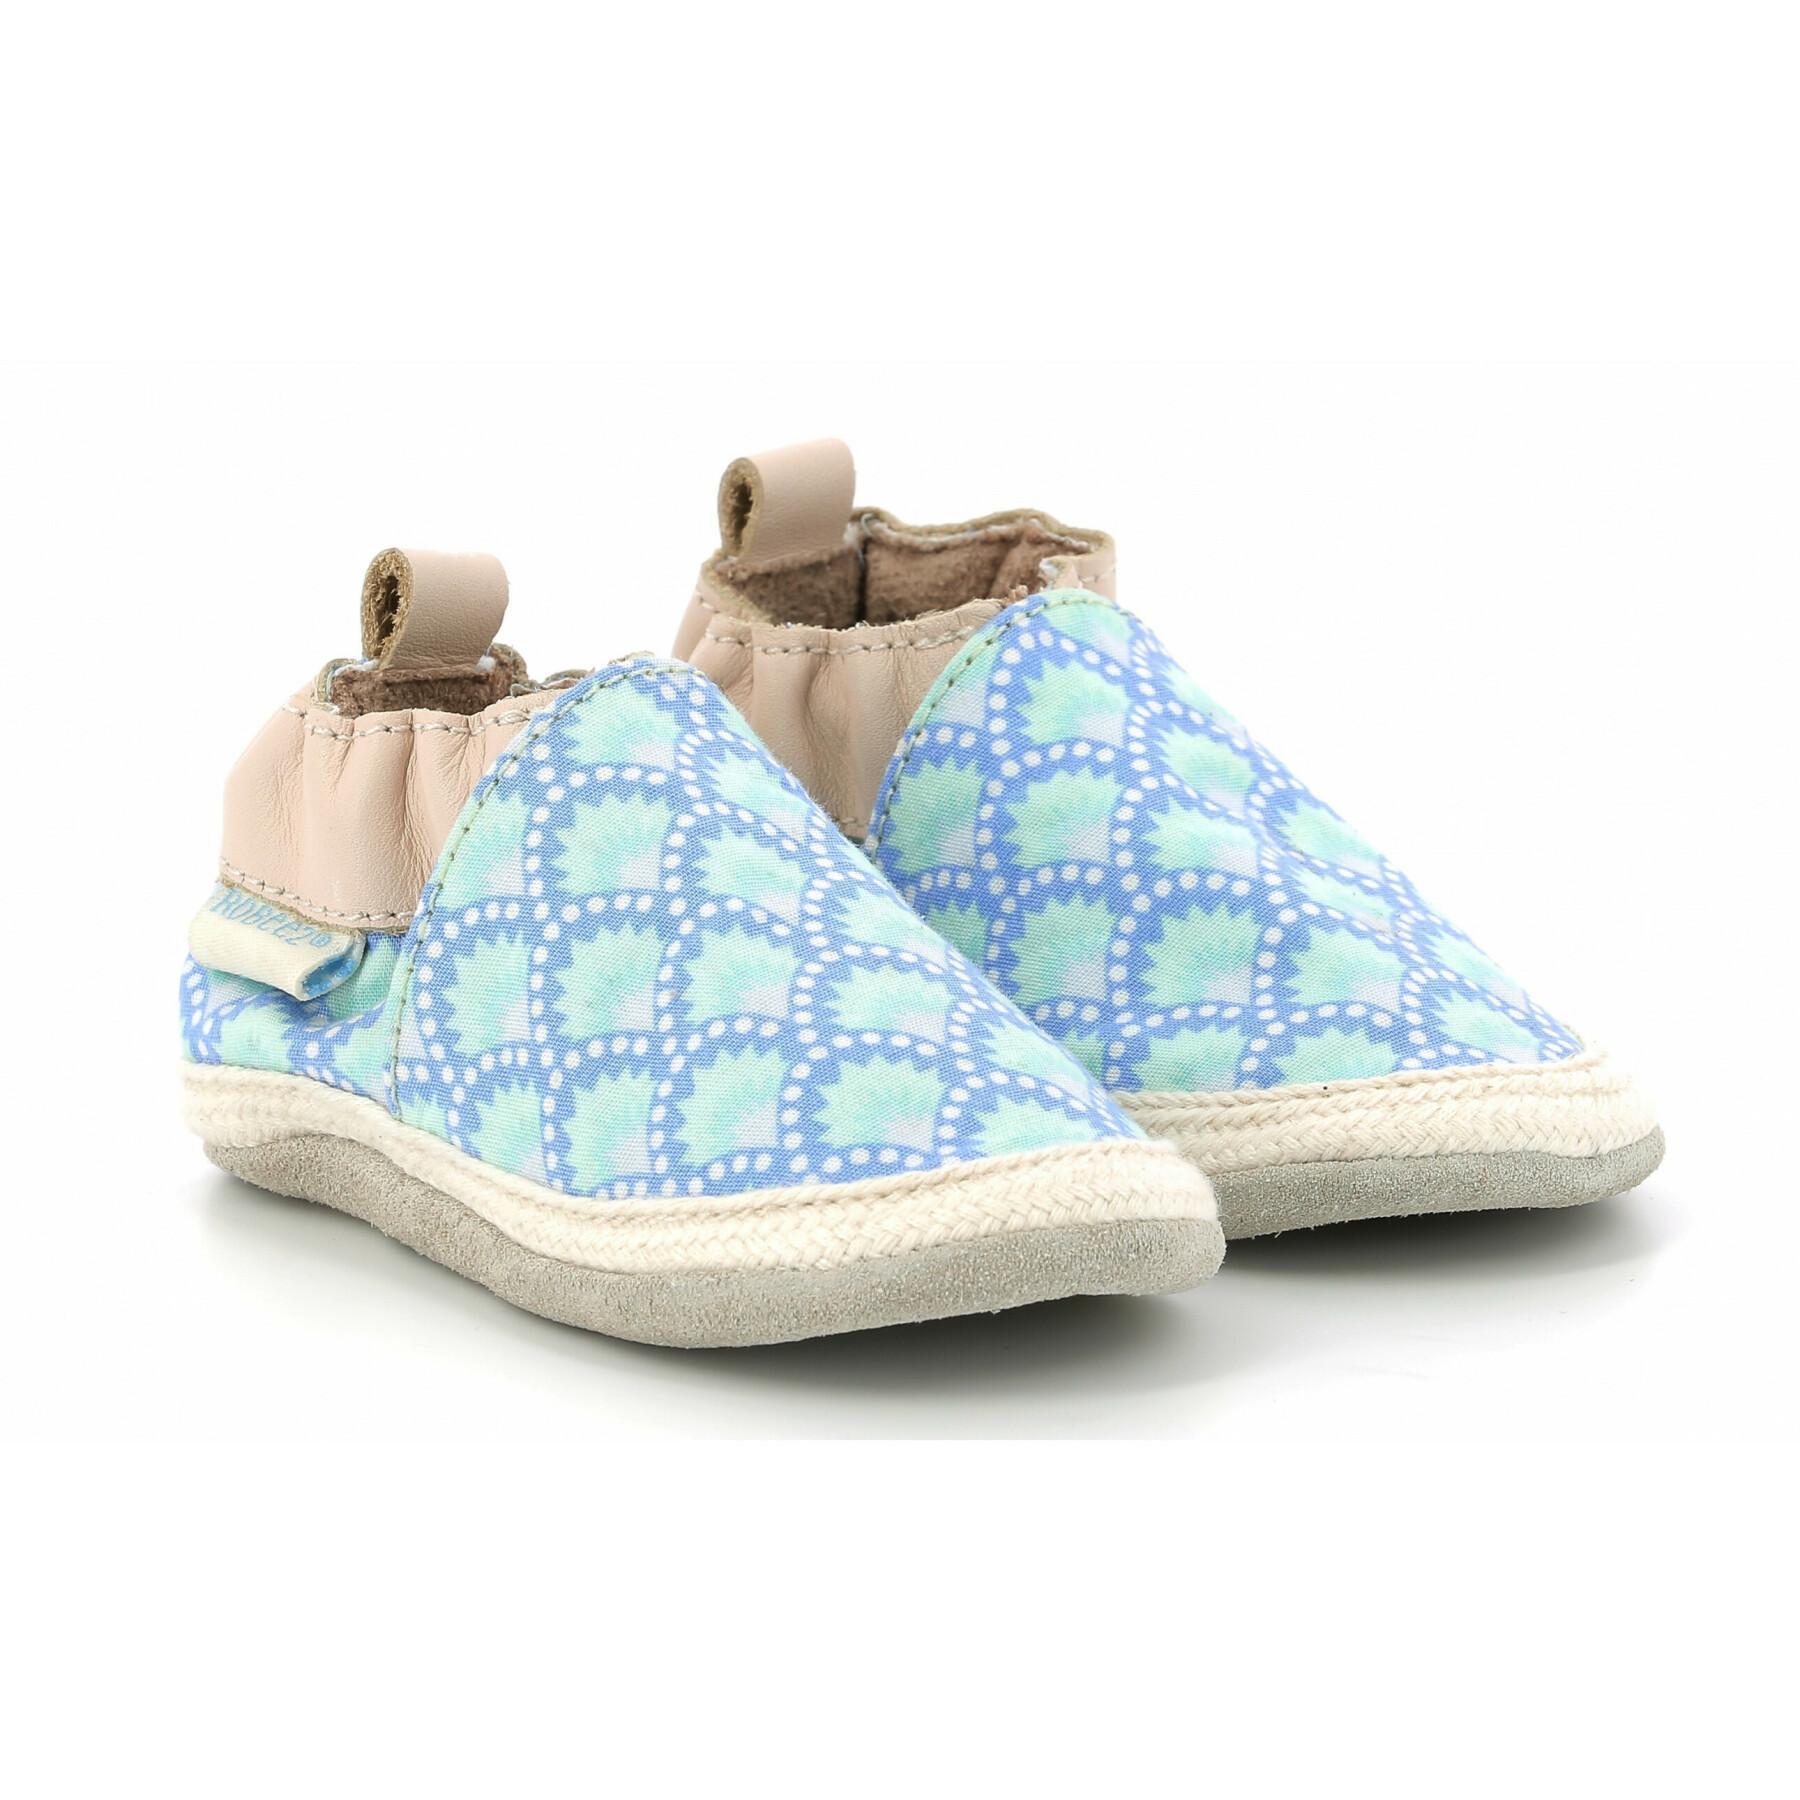 Chaussons bébé Robeez Sunny Camp Wasabi Washed